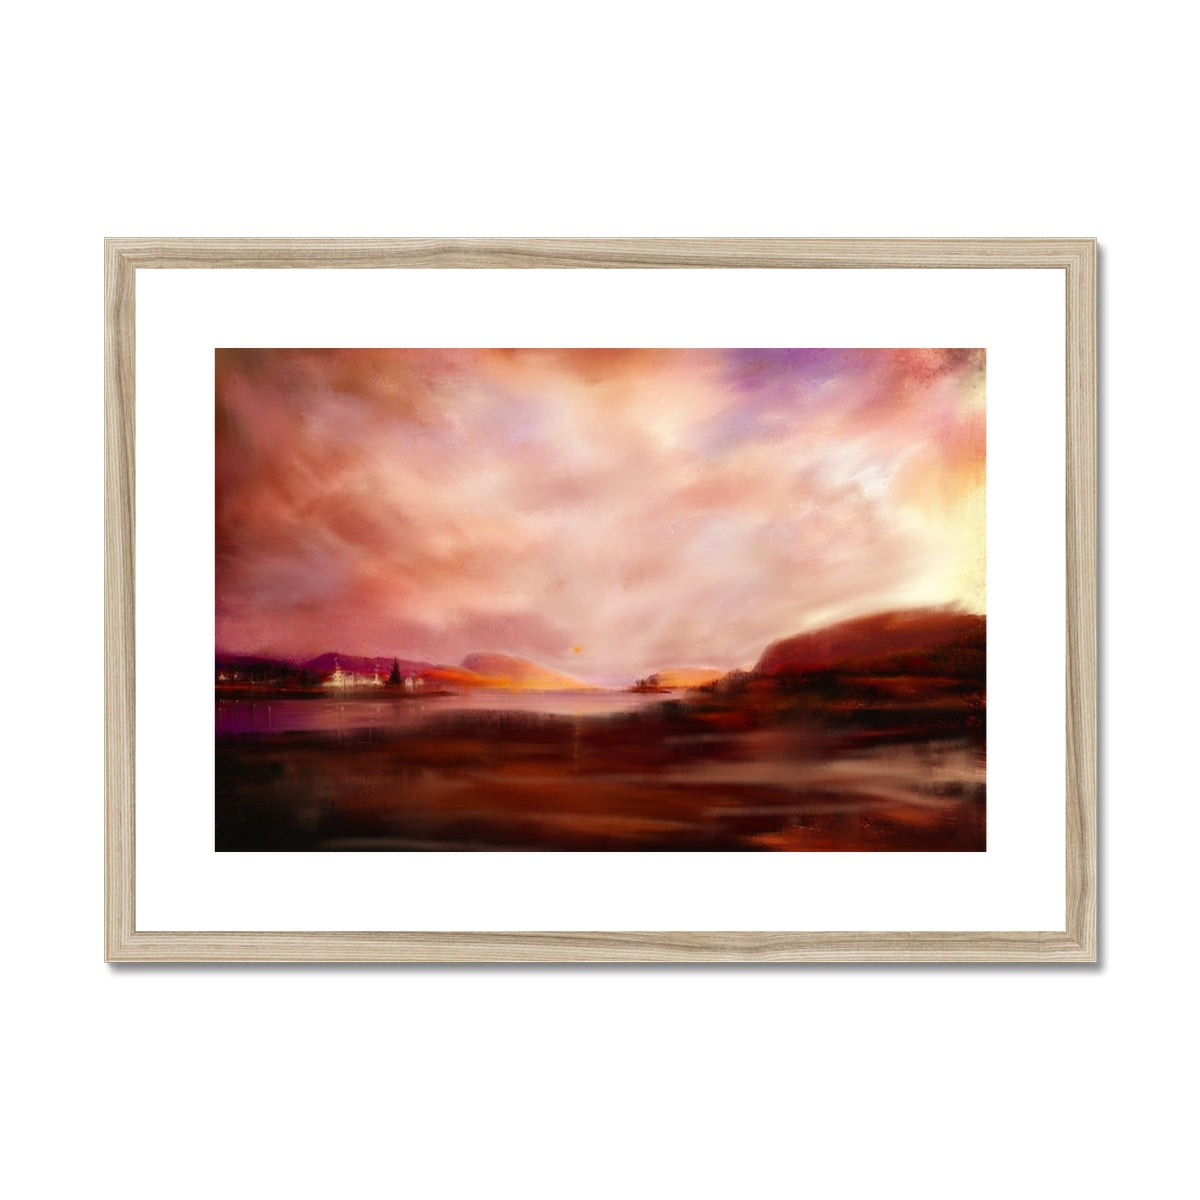 Plockton Sunset Painting | Framed & Mounted Prints From Scotland-Framed & Mounted Prints-Scottish Highlands & Lowlands Art Gallery-A2 Landscape-Natural Frame-Paintings, Prints, Homeware, Art Gifts From Scotland By Scottish Artist Kevin Hunter